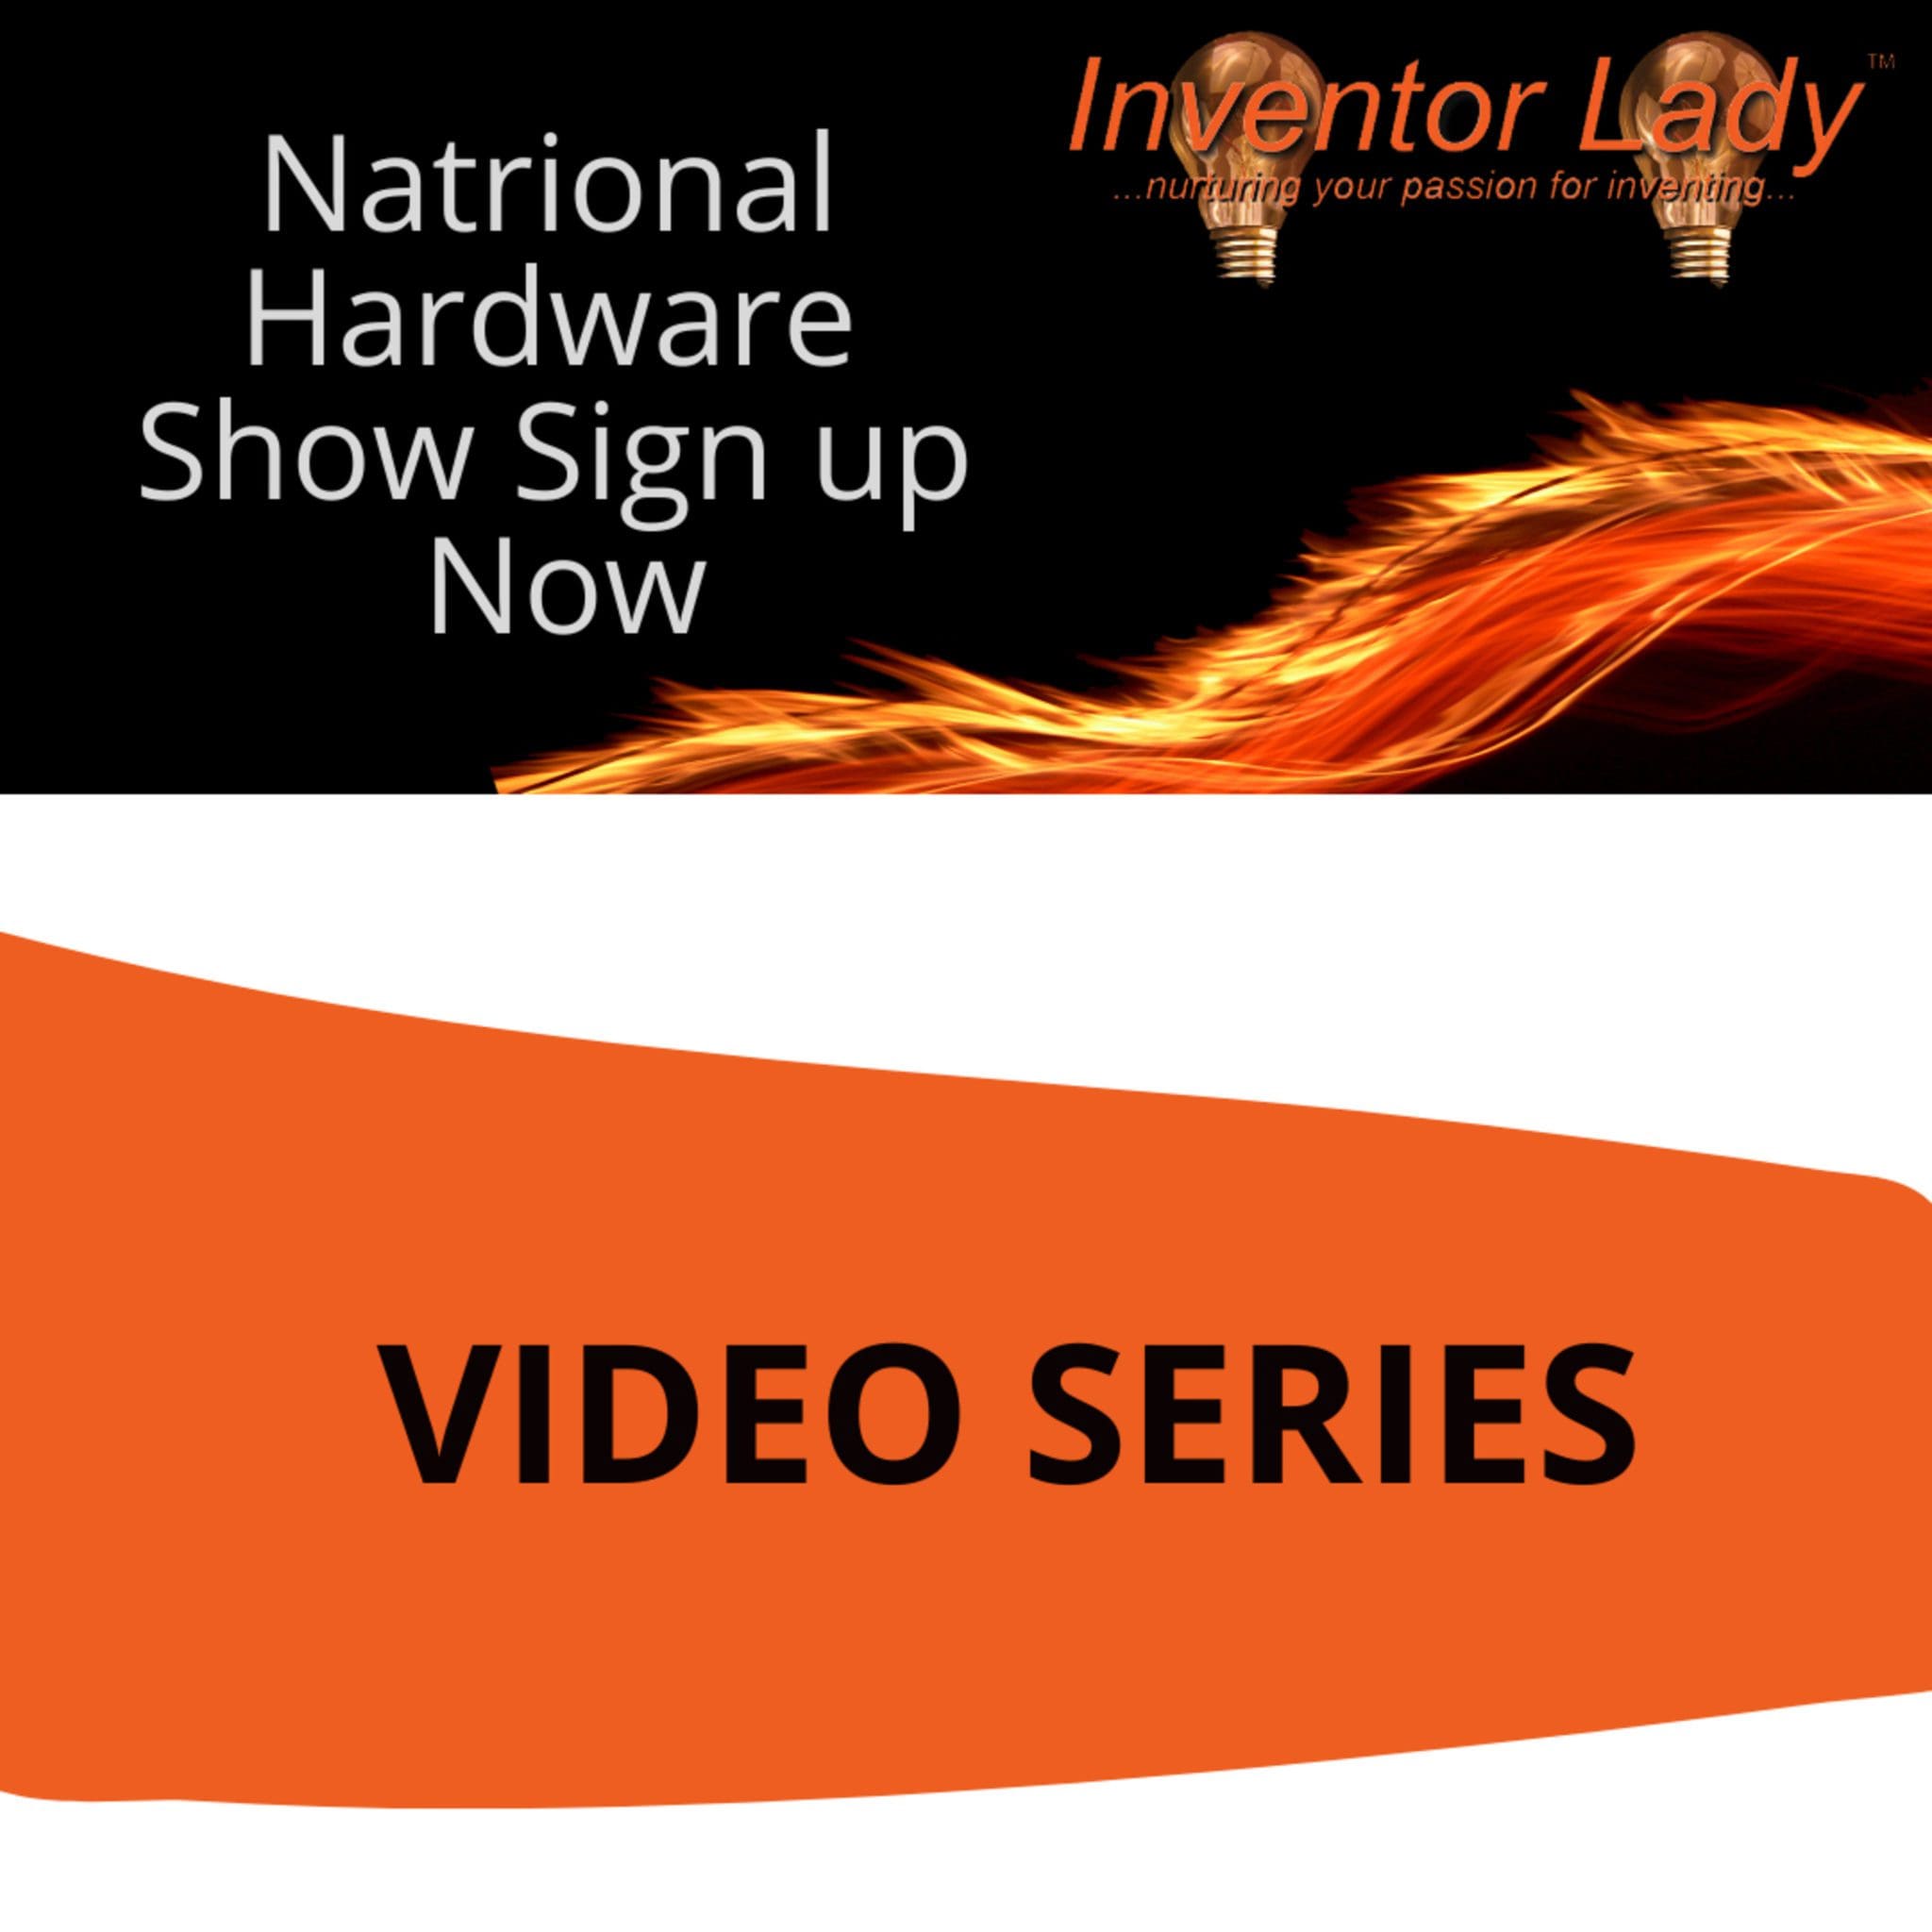 Sign Up Now For The National Hardware Show